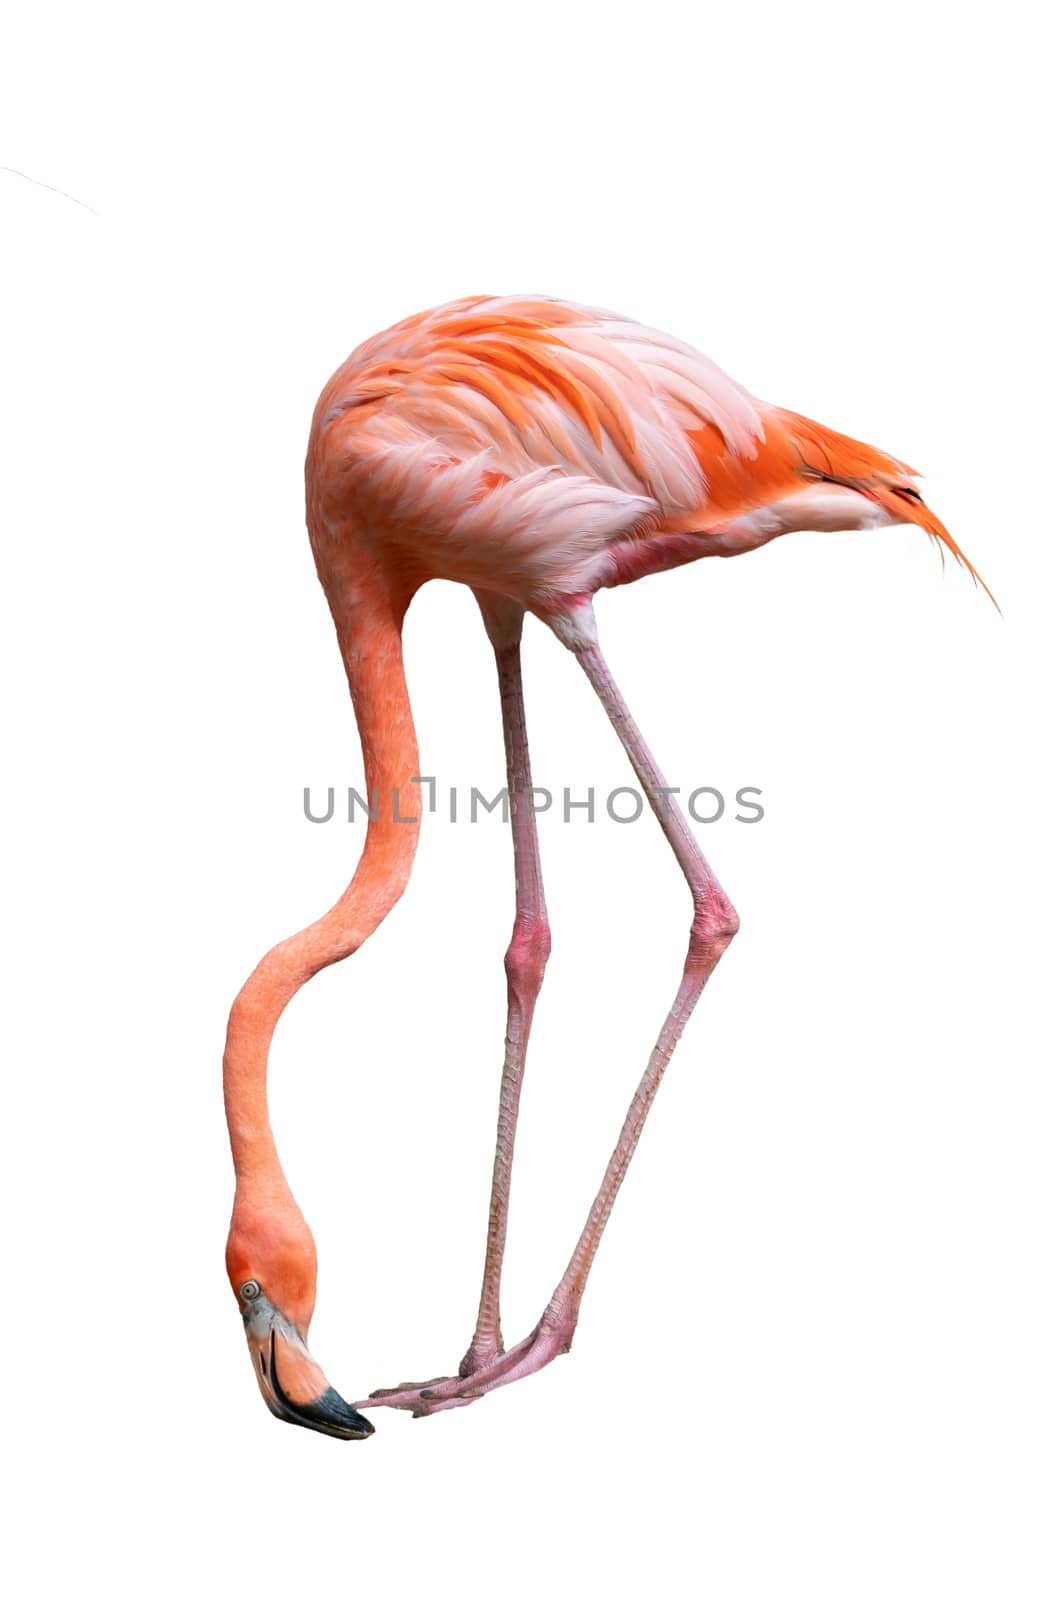 american flamingo bird (Phoenicopterus ruber) isolated on white  by anankkml